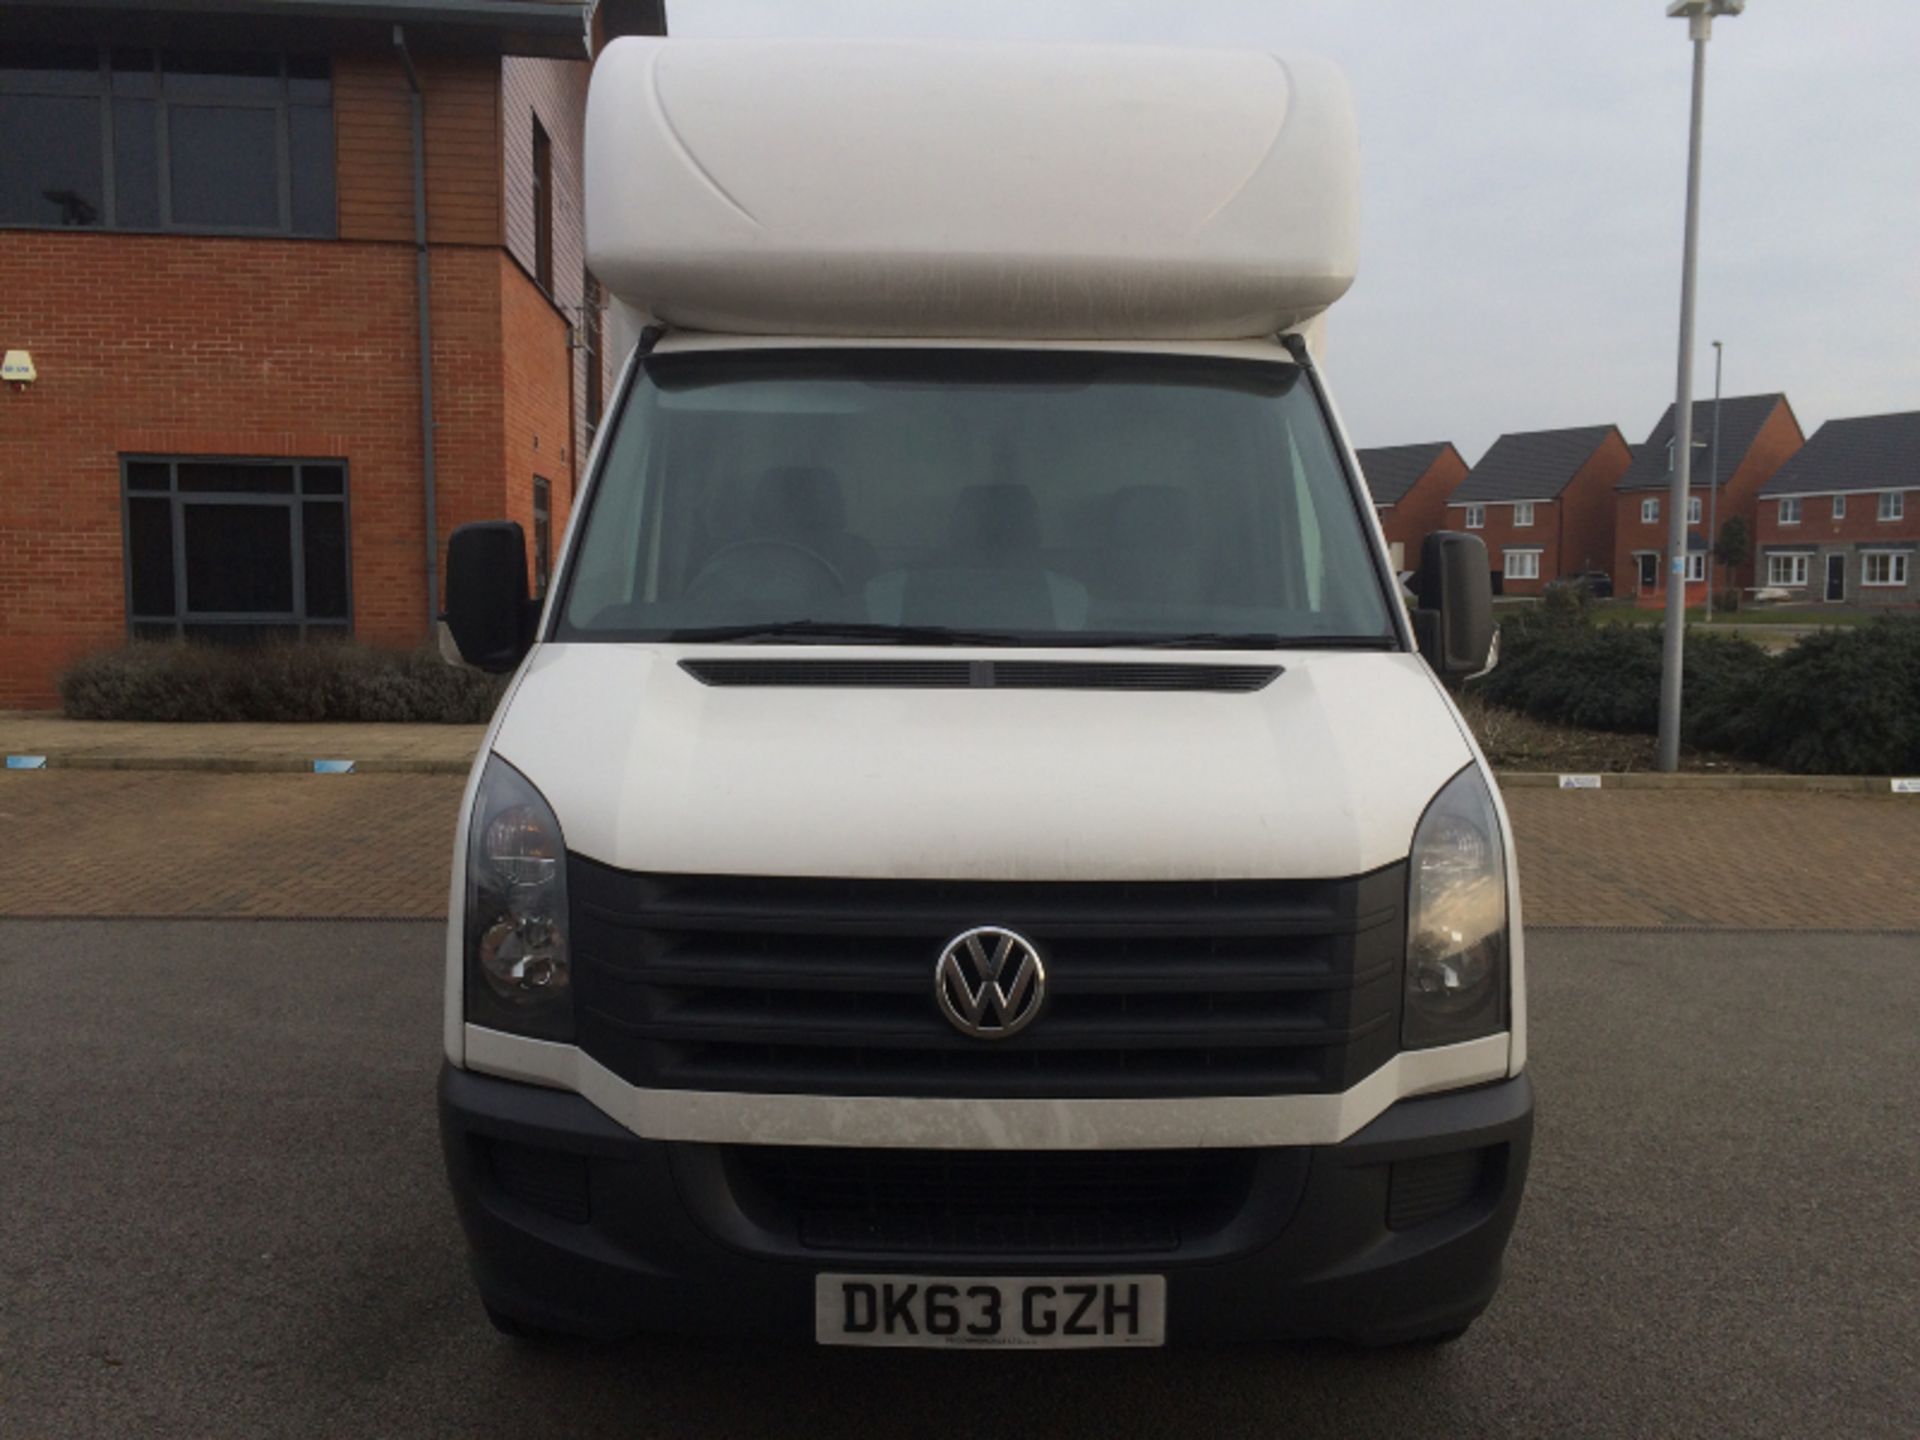 VOLKSWAGEN CRAFTER CR35 2.0TDI "109 BHP" LWB LUTON WITH ELECTRIC TAILIFT "2014 MODEL" LOW MILEAGE - Image 3 of 10